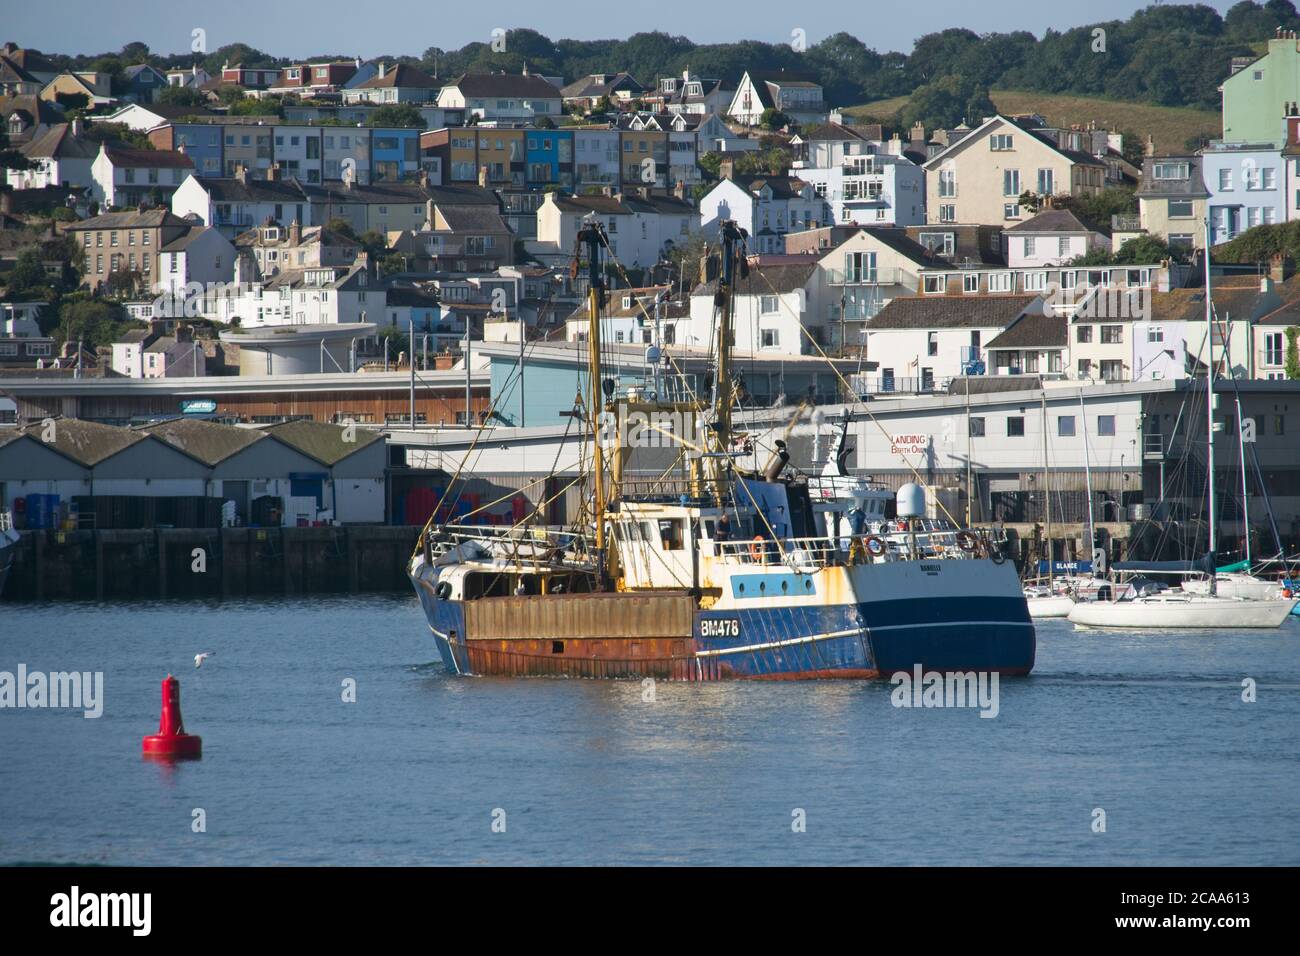 Brixham Trawler BM478 Danielle returning to port Commercial trawlers maneuvering in Brixham harbour Calm sea light blue sky Tiered Buildings behind Stock Photo